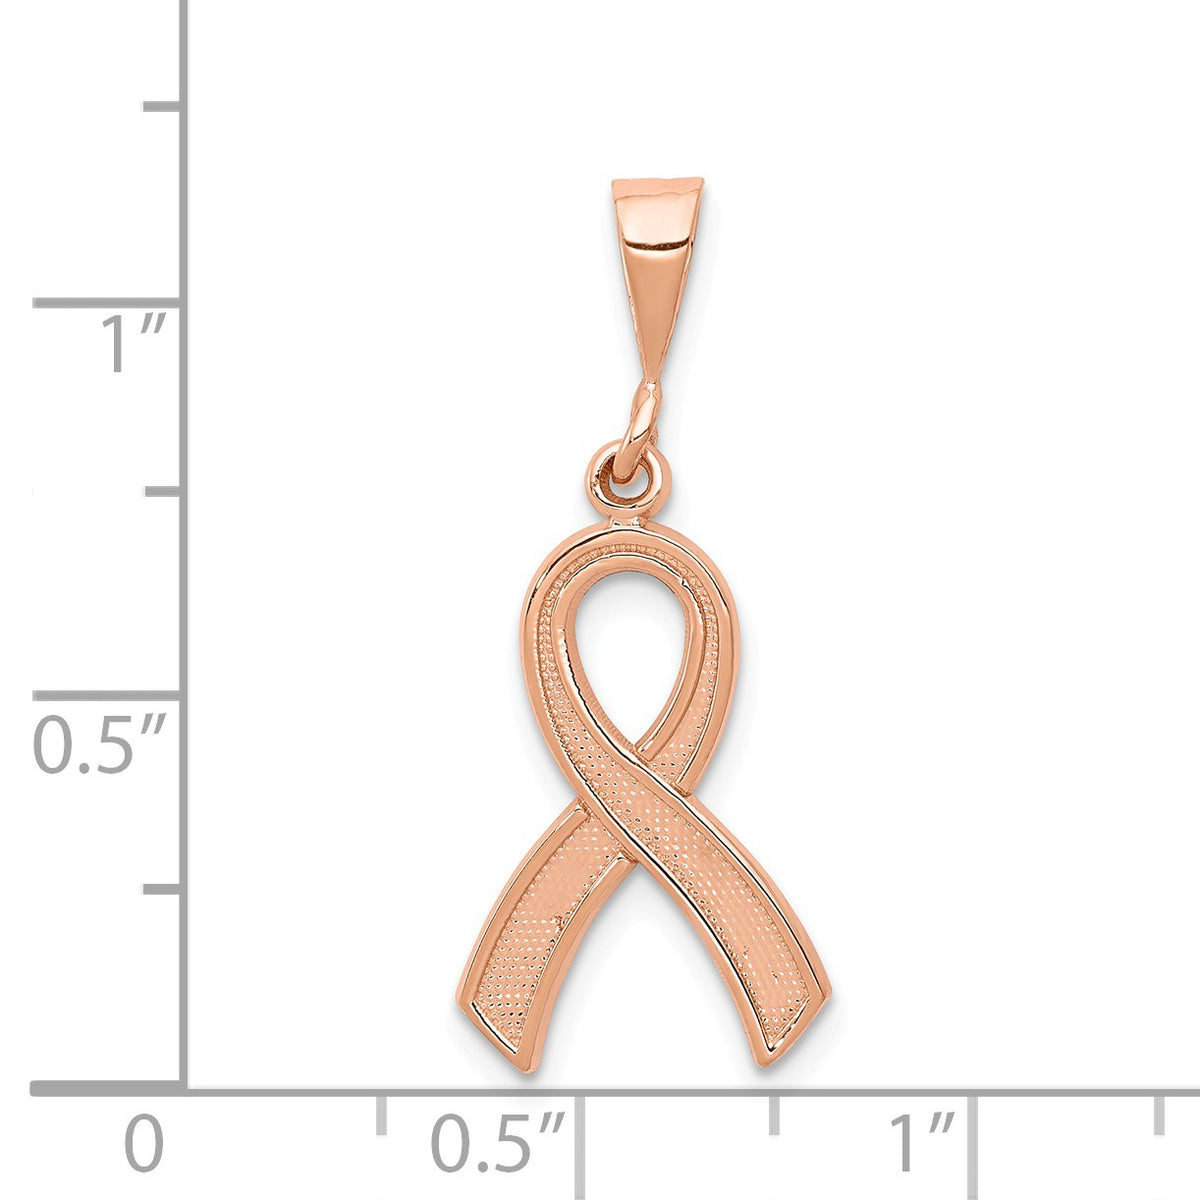 Alternate view of the 14k Rose Gold Polished and Satin Awareness Ribbon Pendant by The Black Bow Jewelry Co.